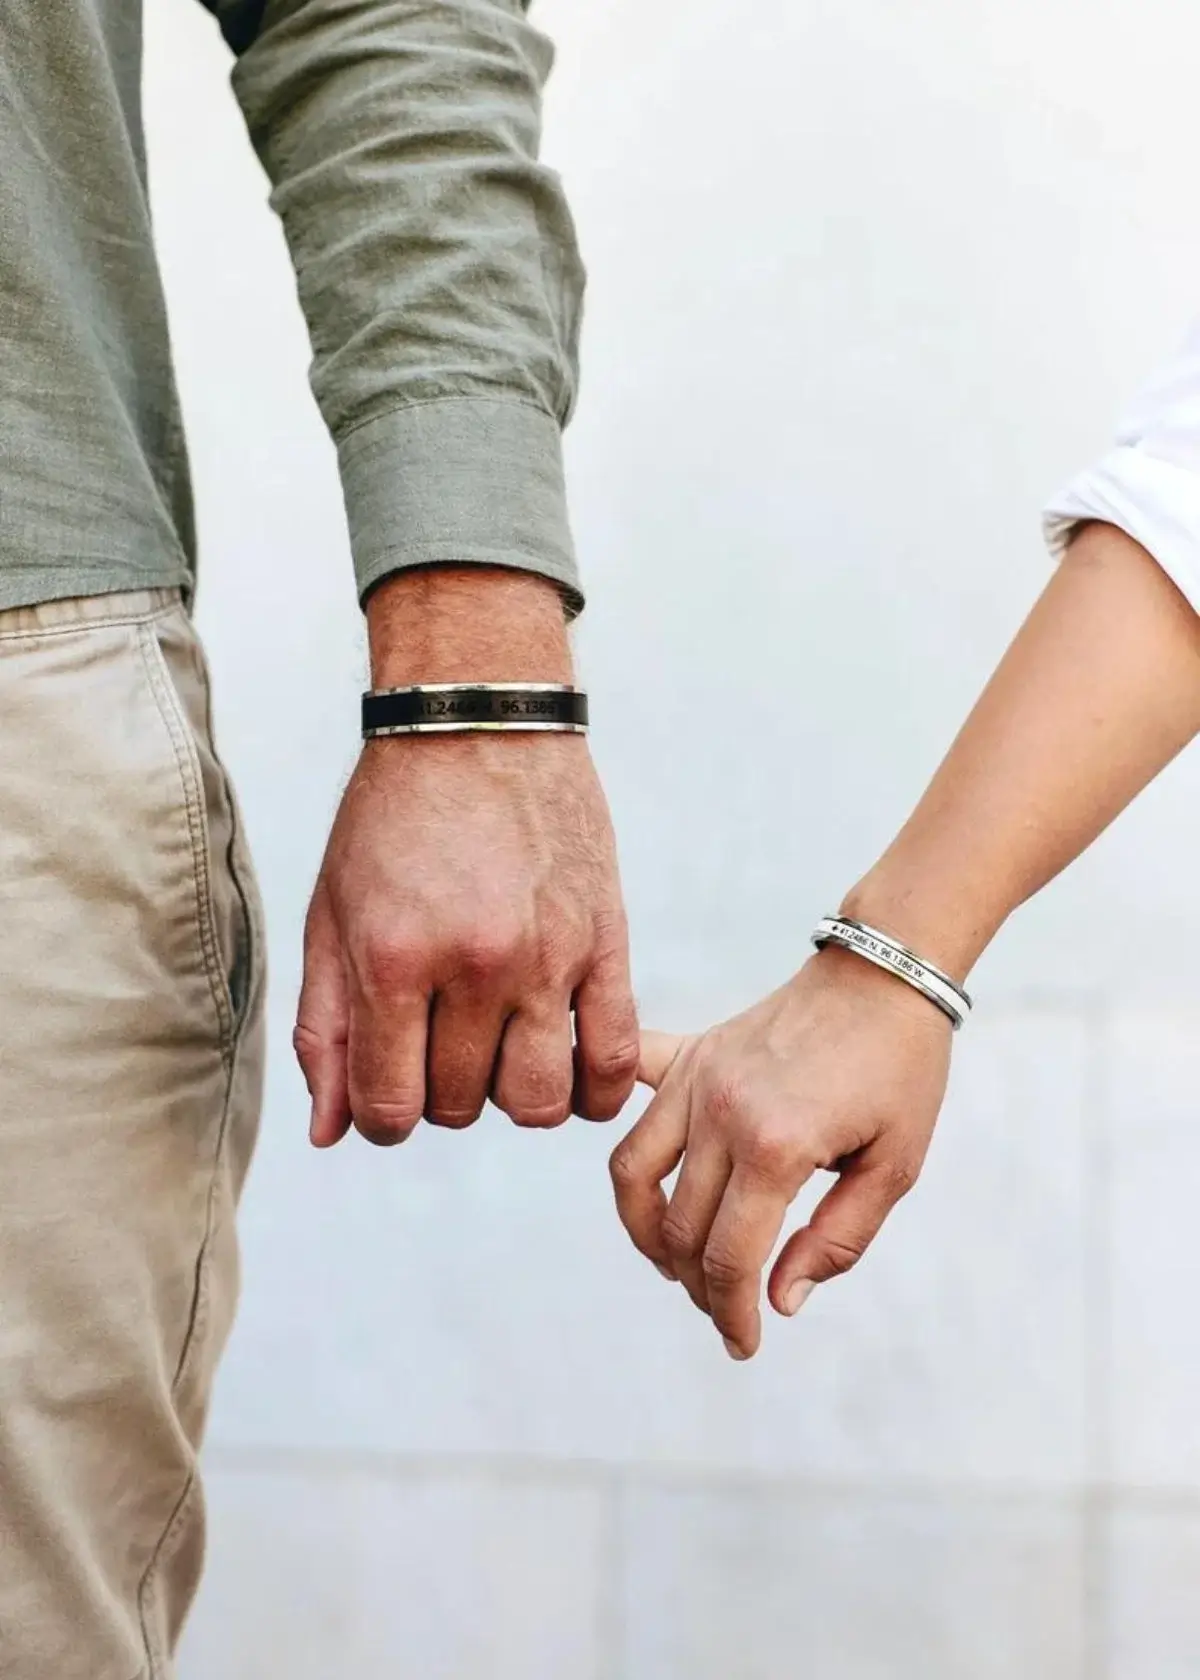 How long do leather couple bracelets typically last?